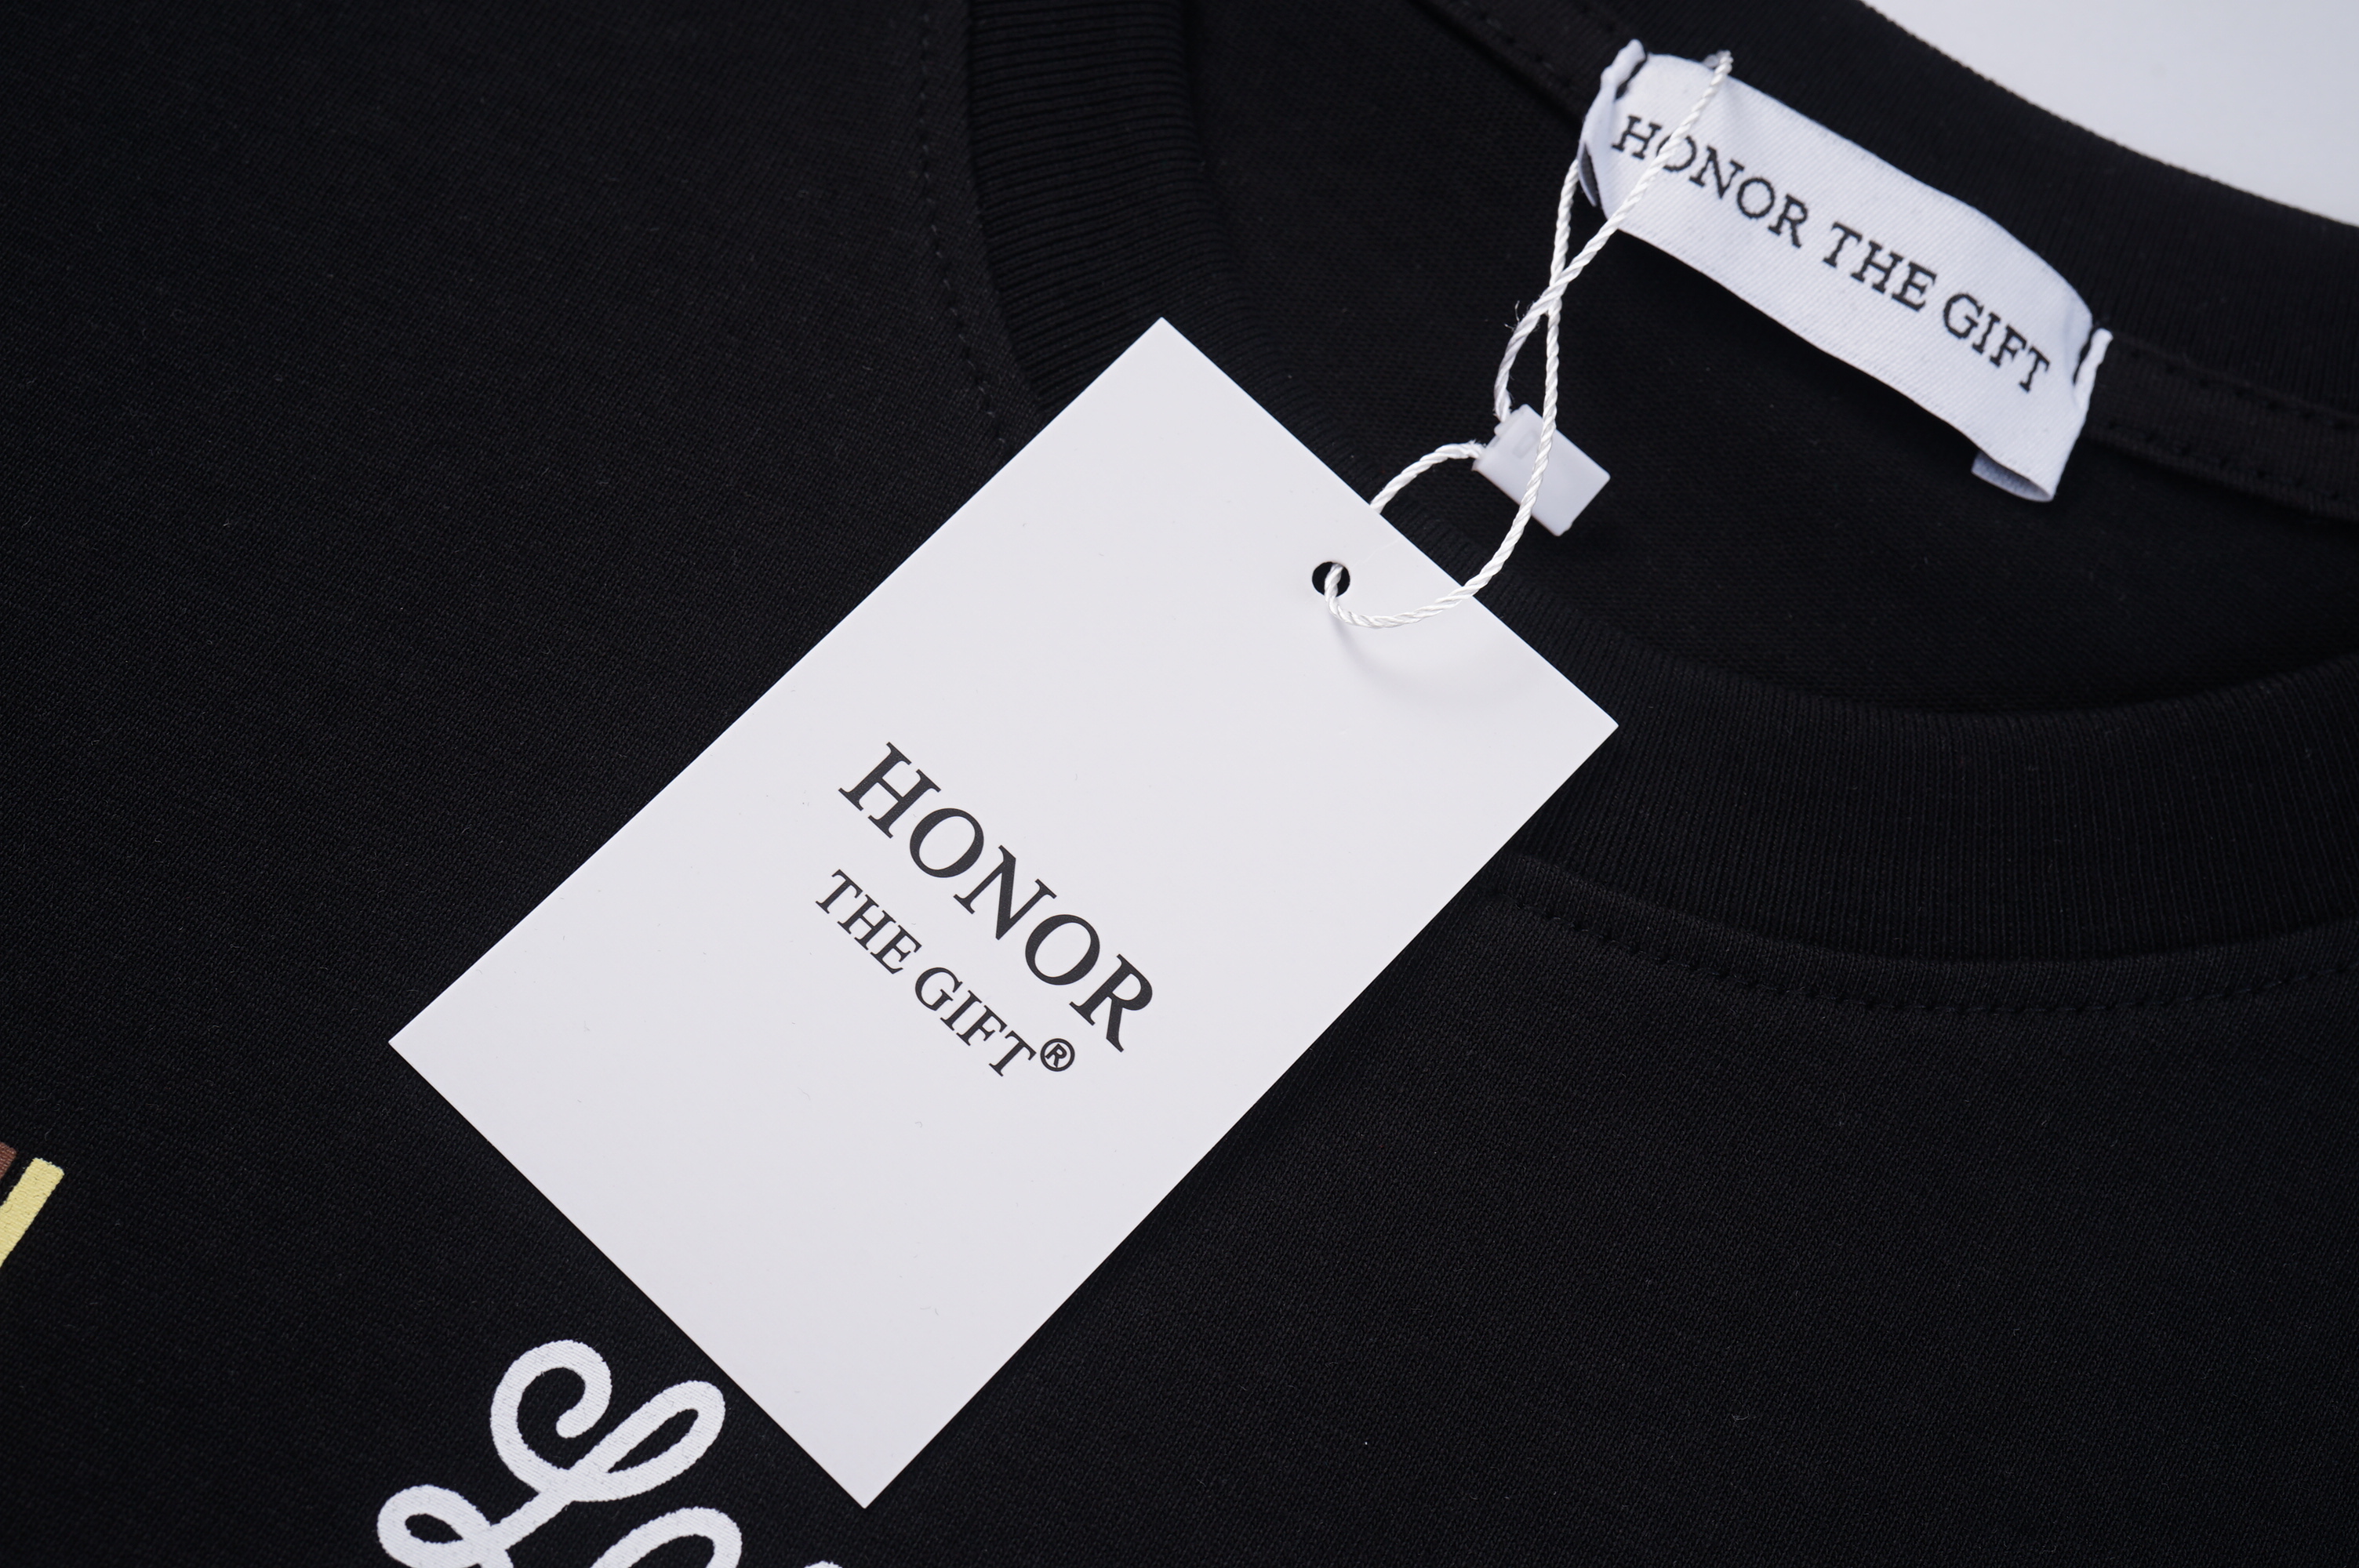 Honor The Gift T-Shirts